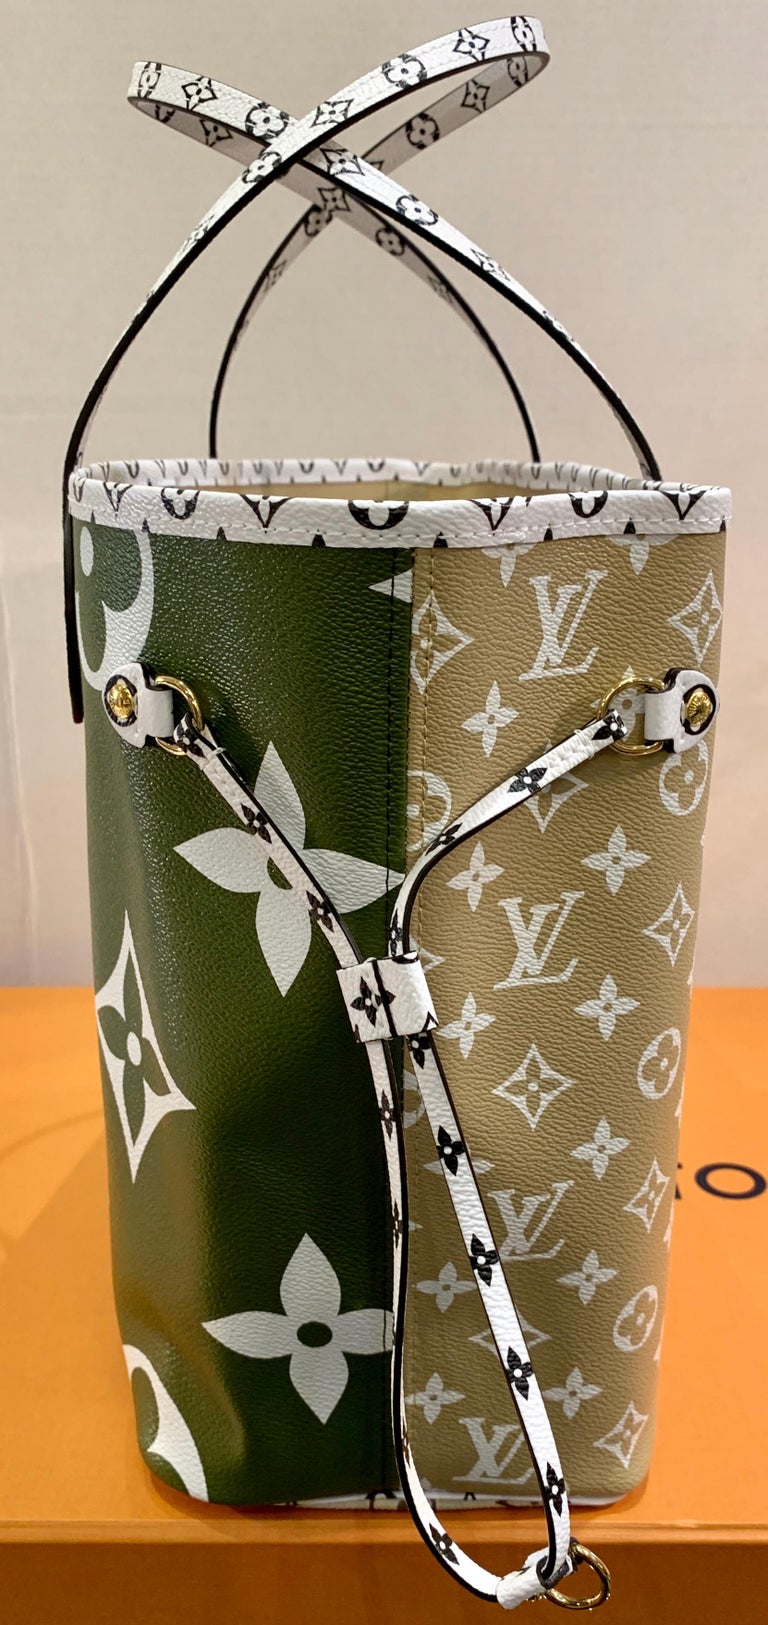 New Sold Out Louis Vuitton NEVERFULL MM Khaki/Beige Ladies Tote Bag Summer 2019 at 1stdibs